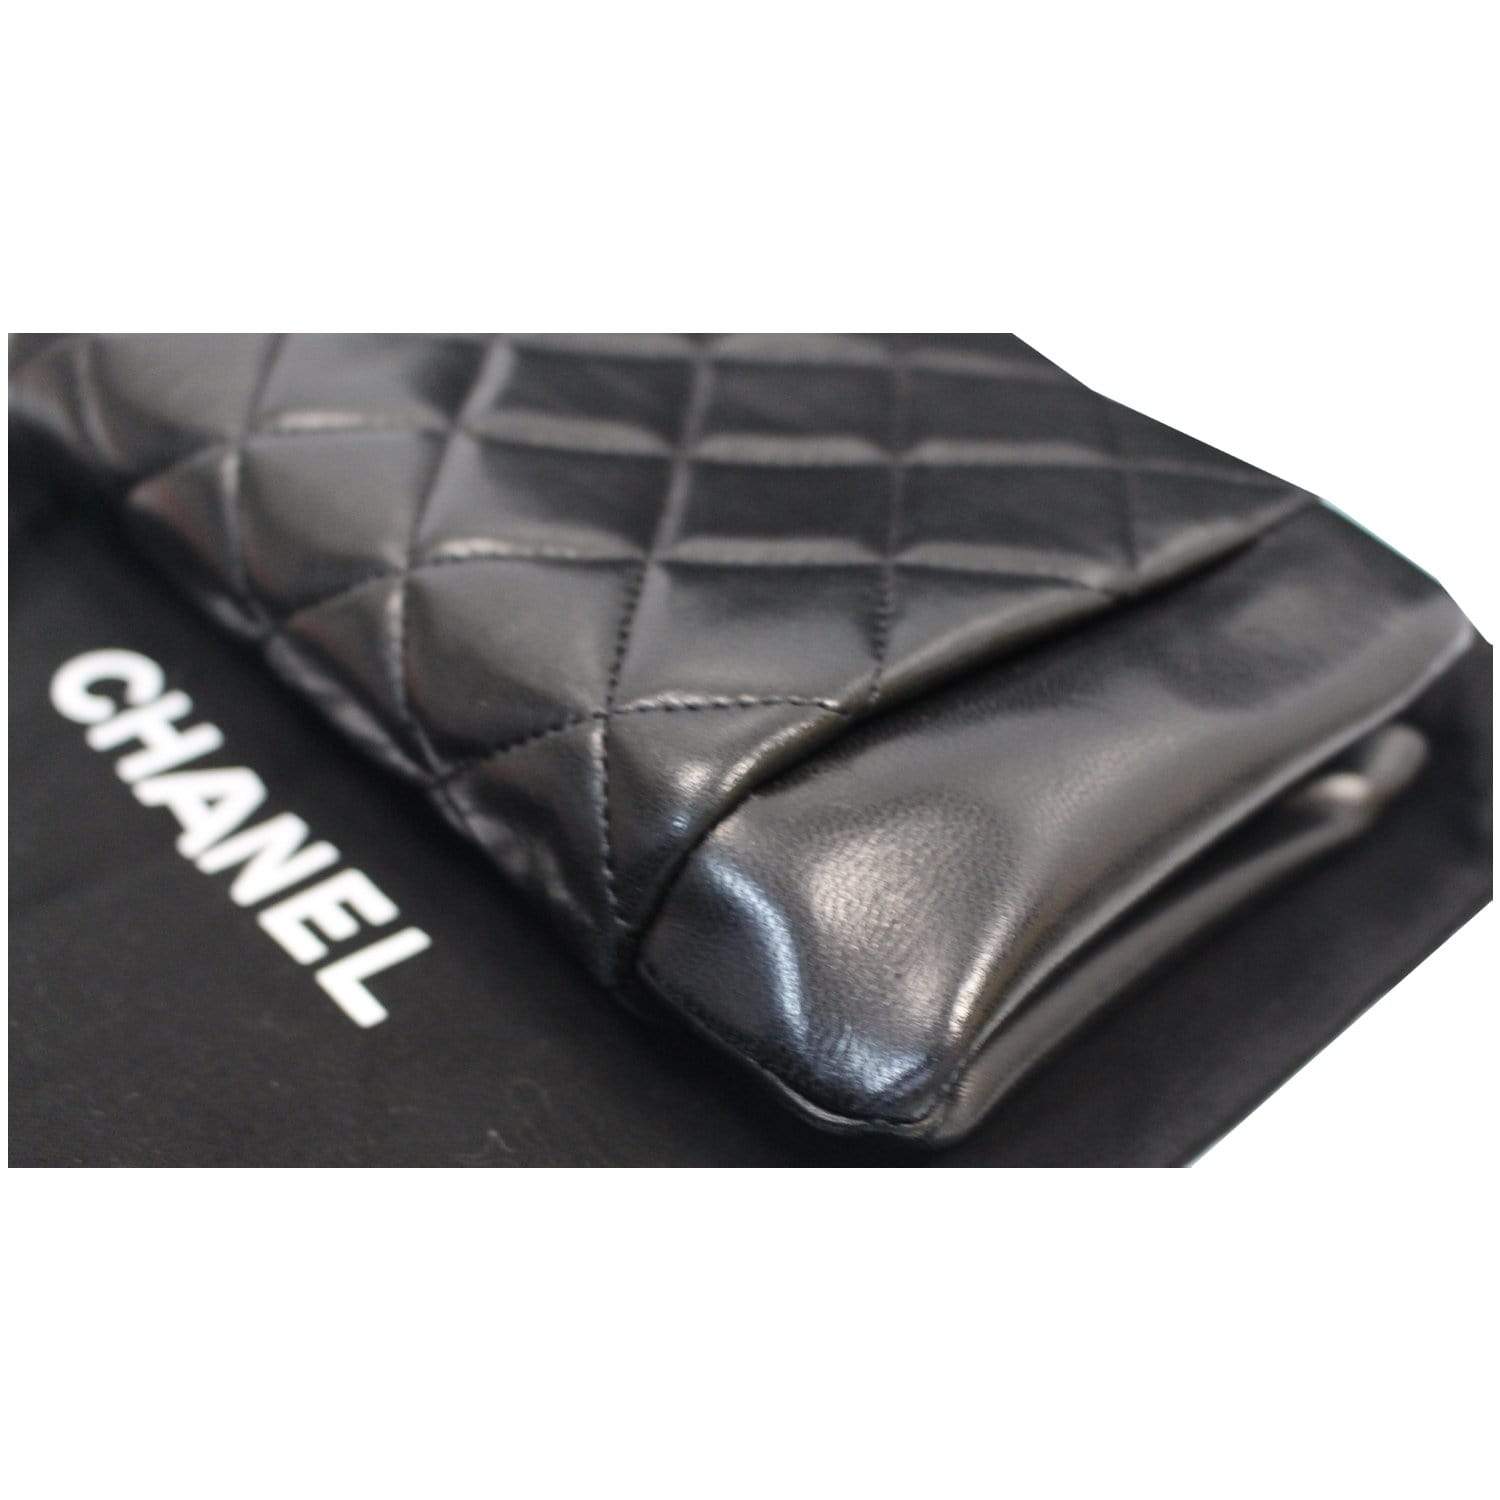 Chanel Black Lambskin Leather Quilted Classic Double Flap SM Bag w/ Rose Gold HW